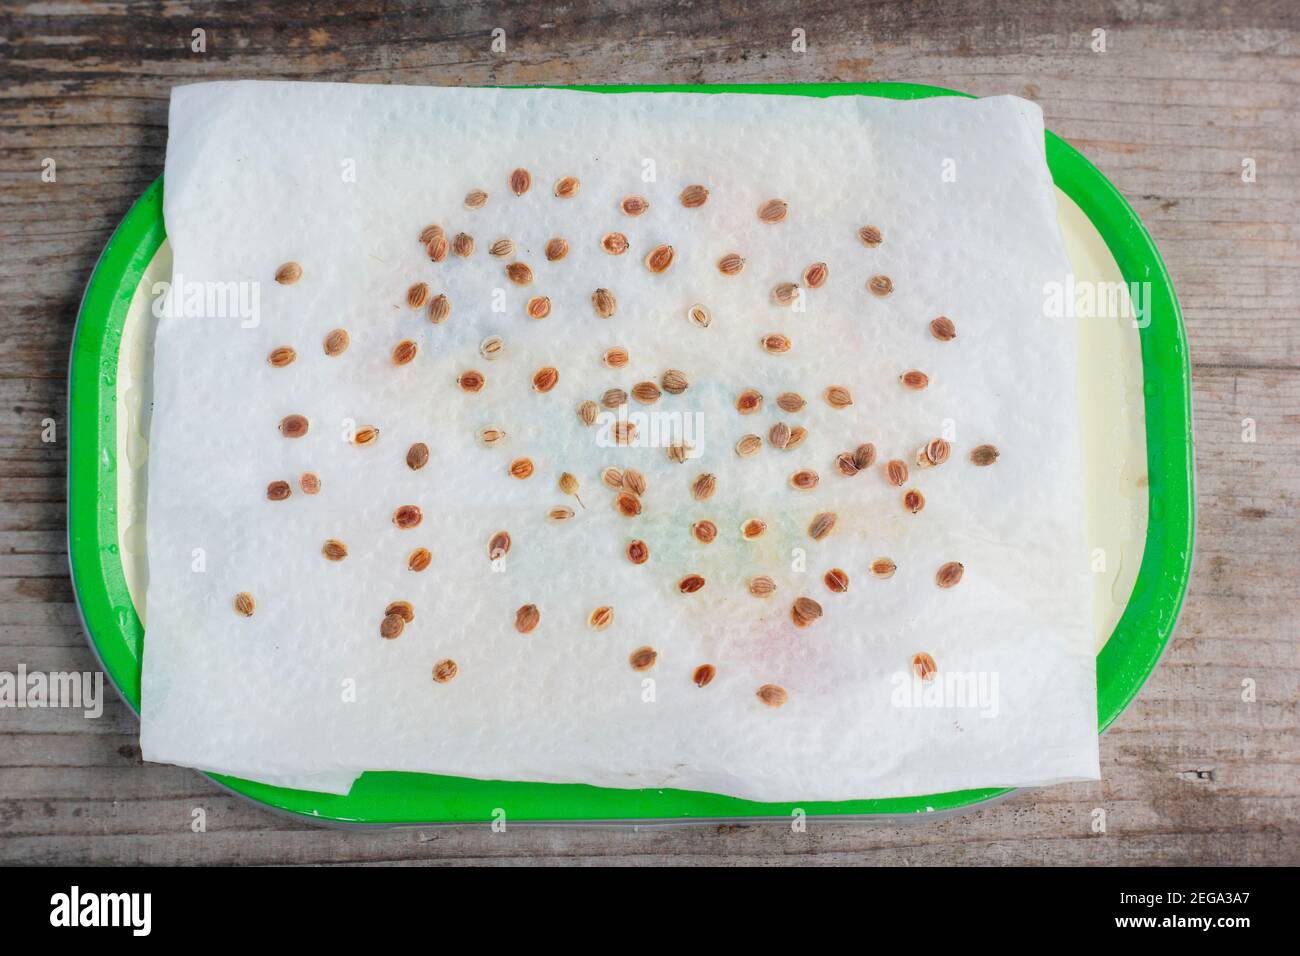 Pastinaca sativa. Germinating parsnip seed on damp kitchen roll to test seed viability before planting successes. UK Stock Photo